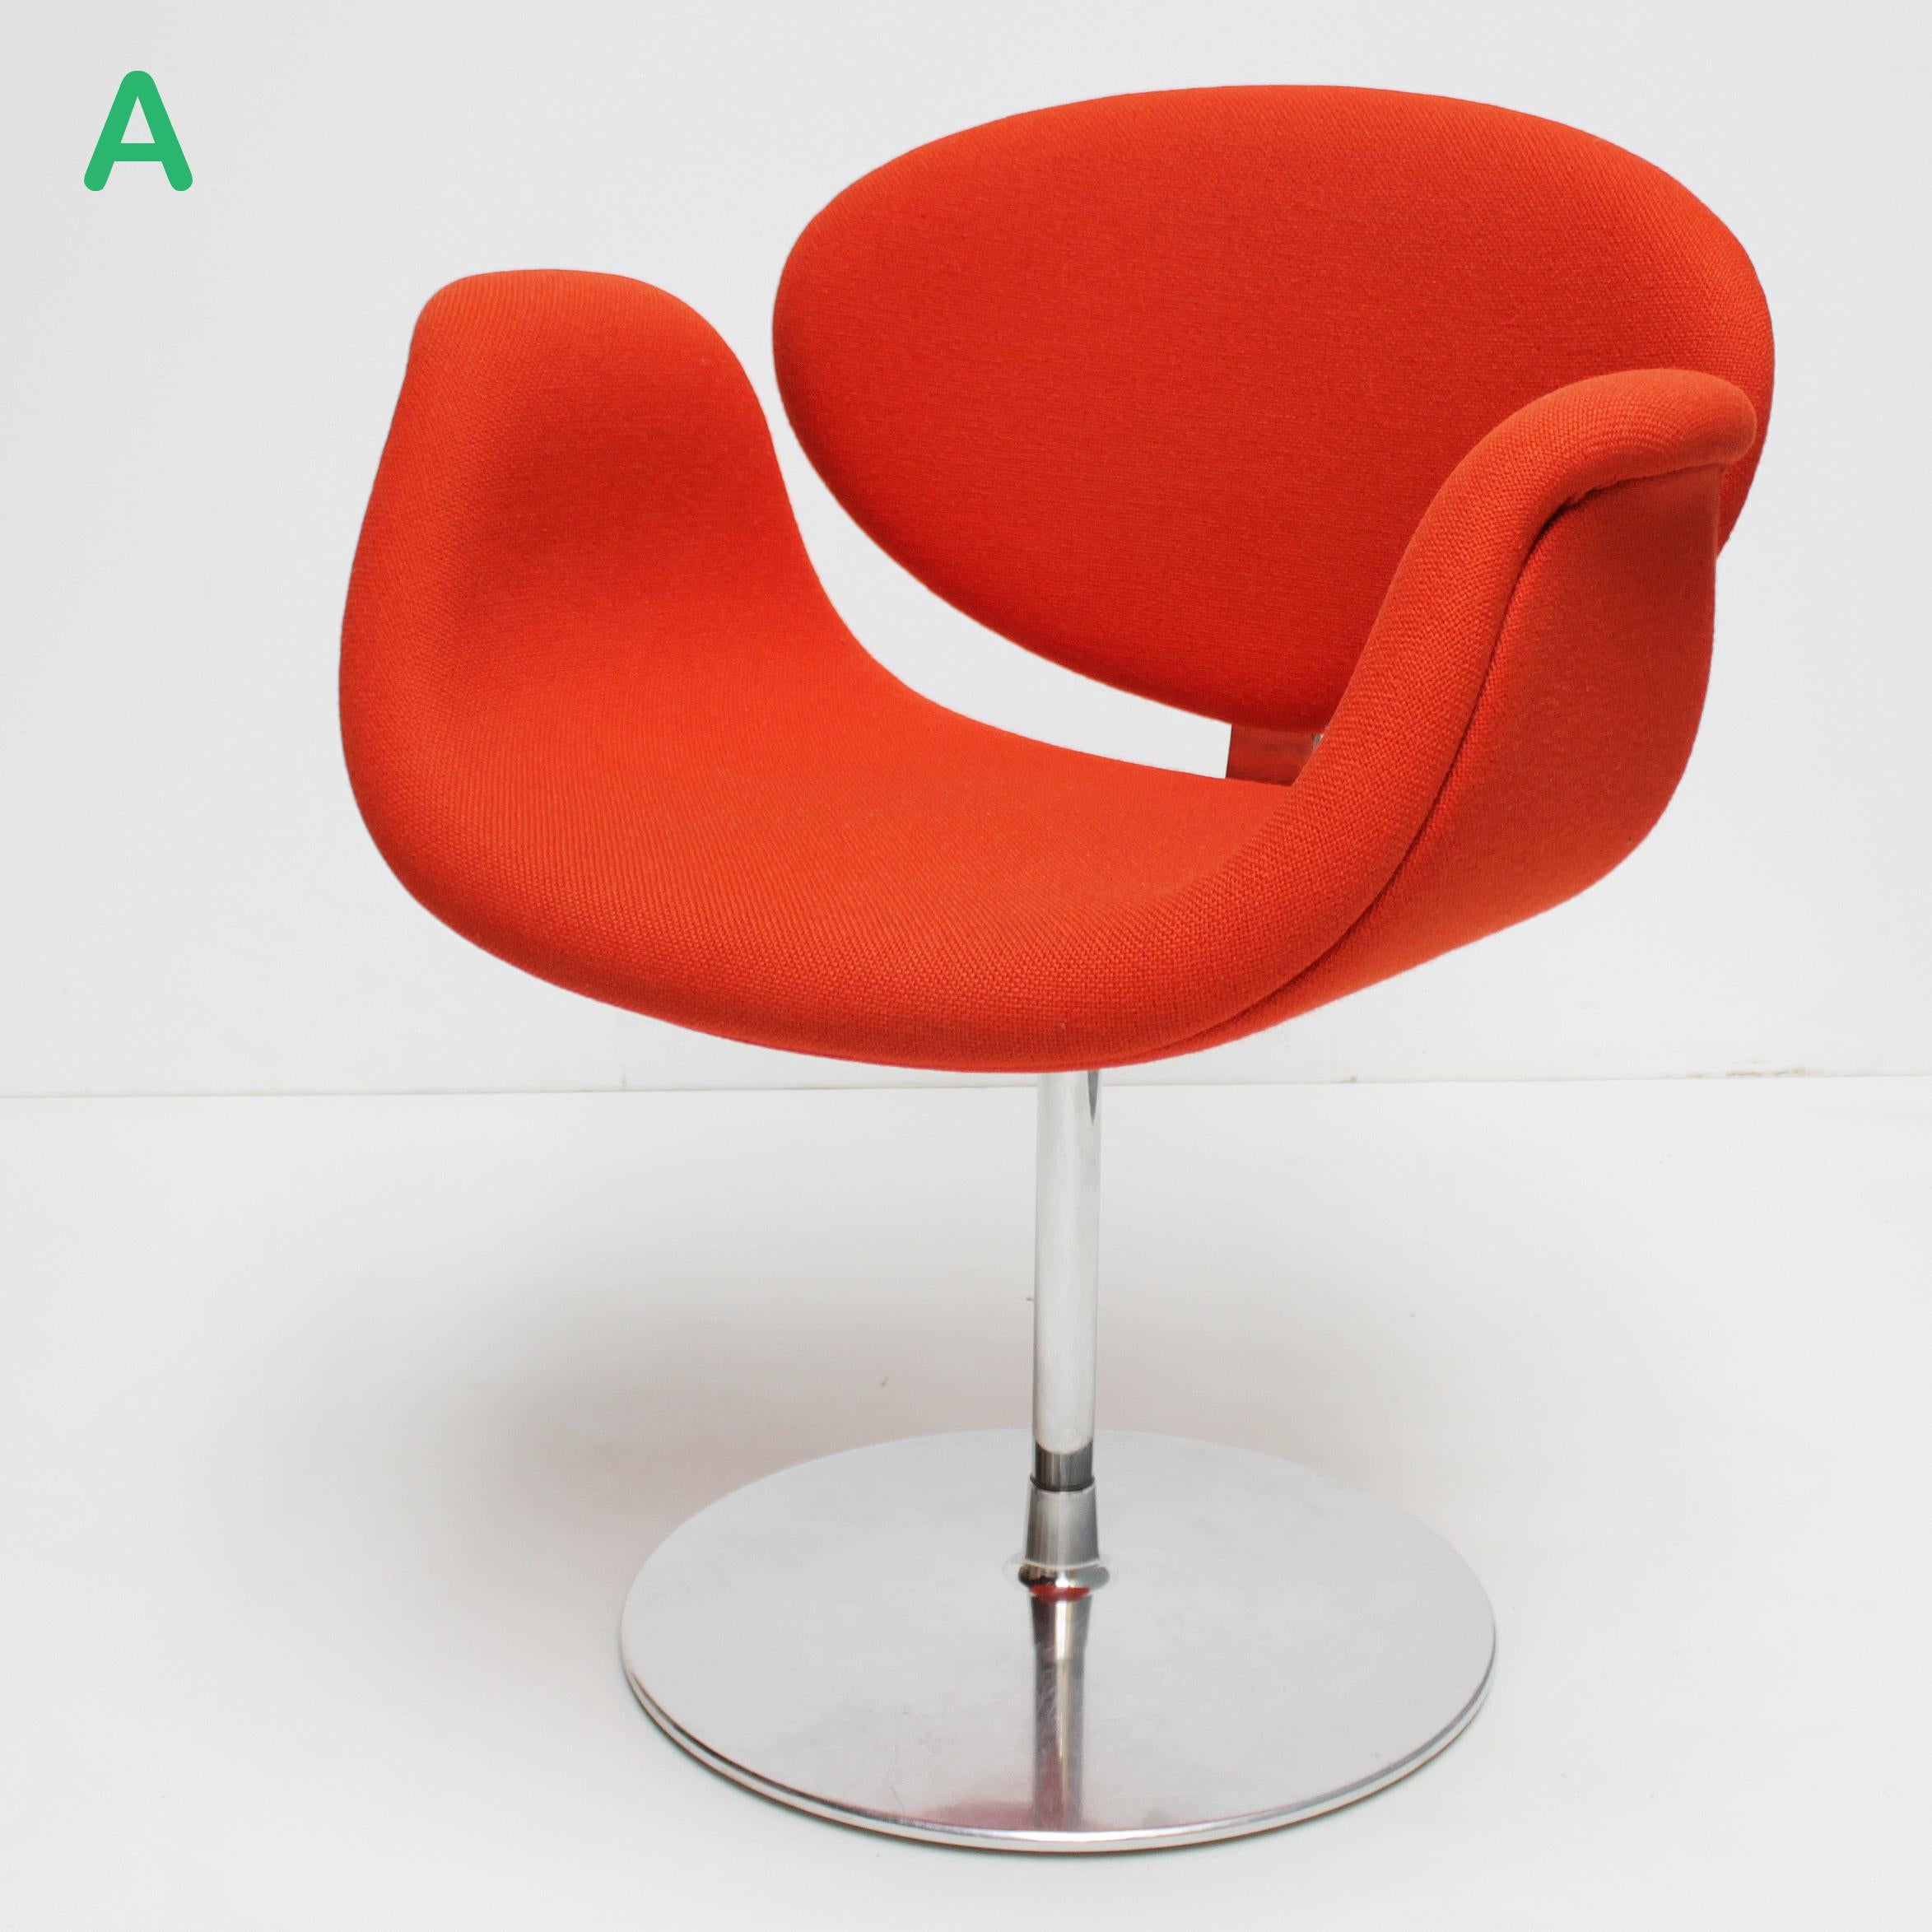 'Little' tulip chairs by Pierre Paulin for Artifort Holland. Model No. F545. 
Offered 8 chairs in three different colors. One in red (A), three in orange (B) and four in pink/red (C). Colorful fabric-covered latex-foam upholstered steel frame on